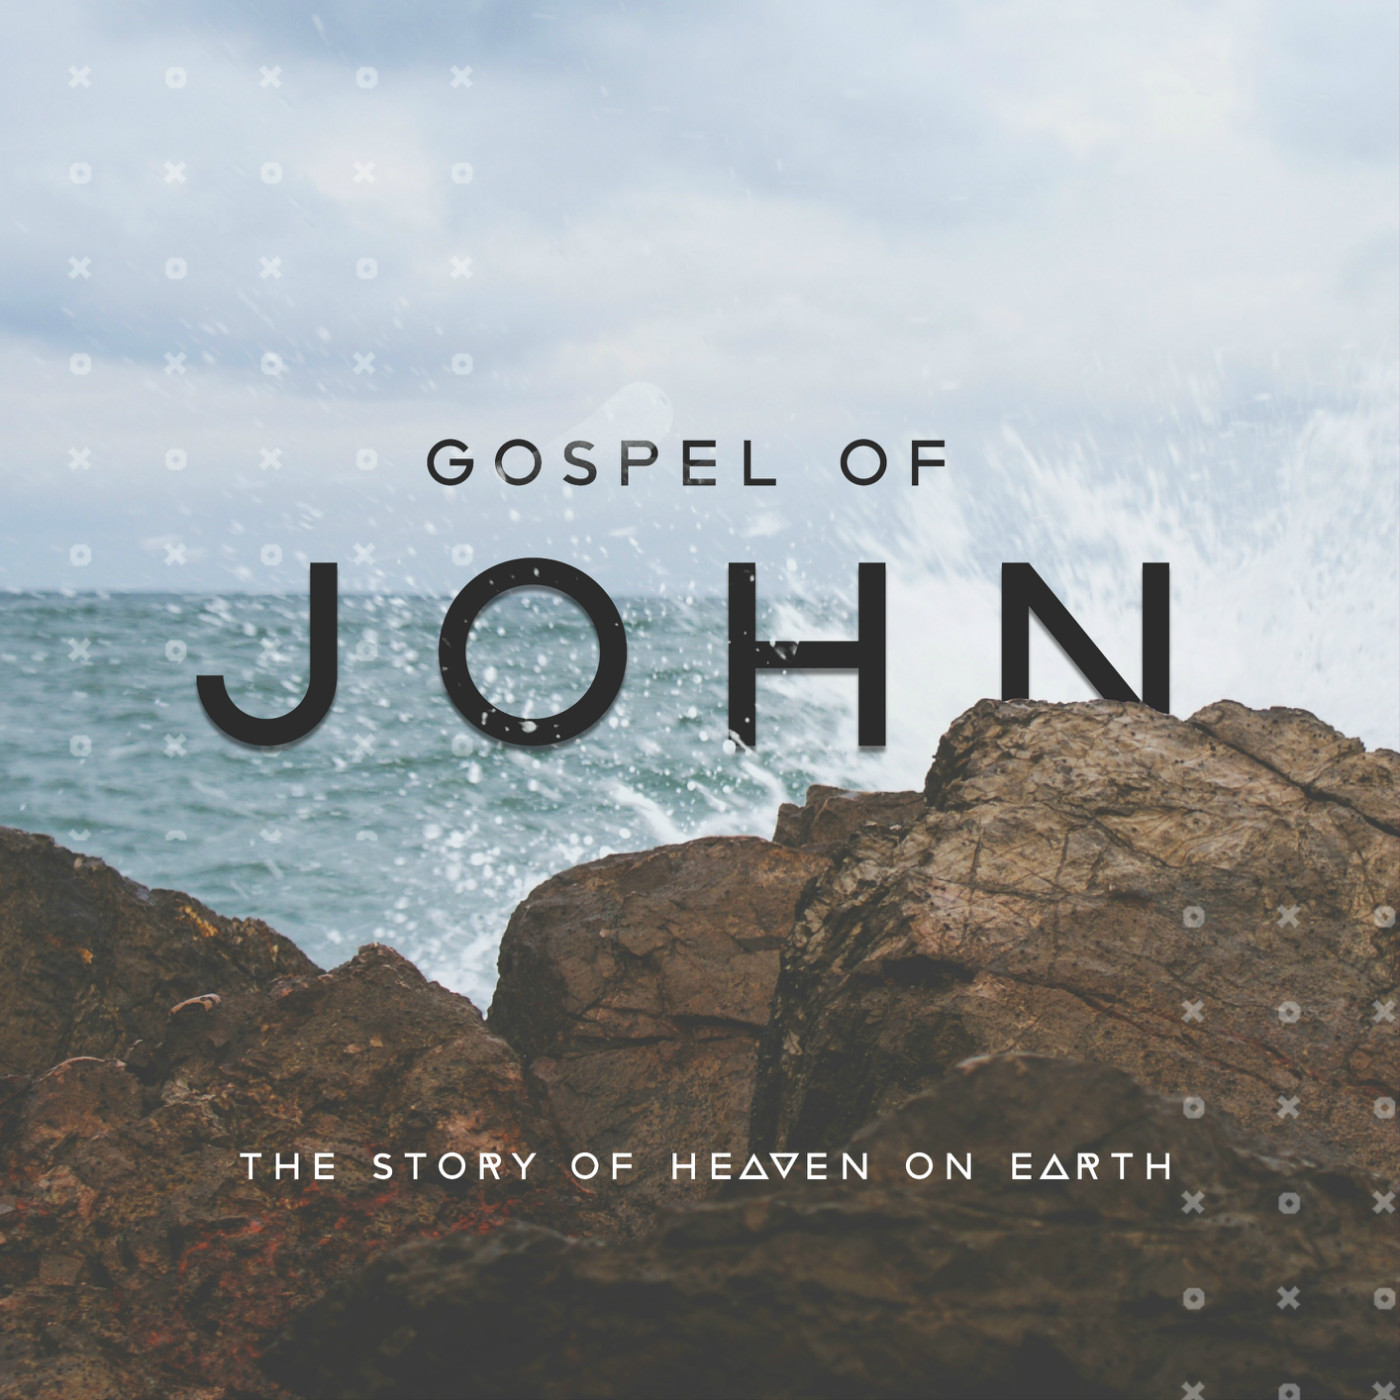 The Gospel of John Series: ”Come and See” Part 2